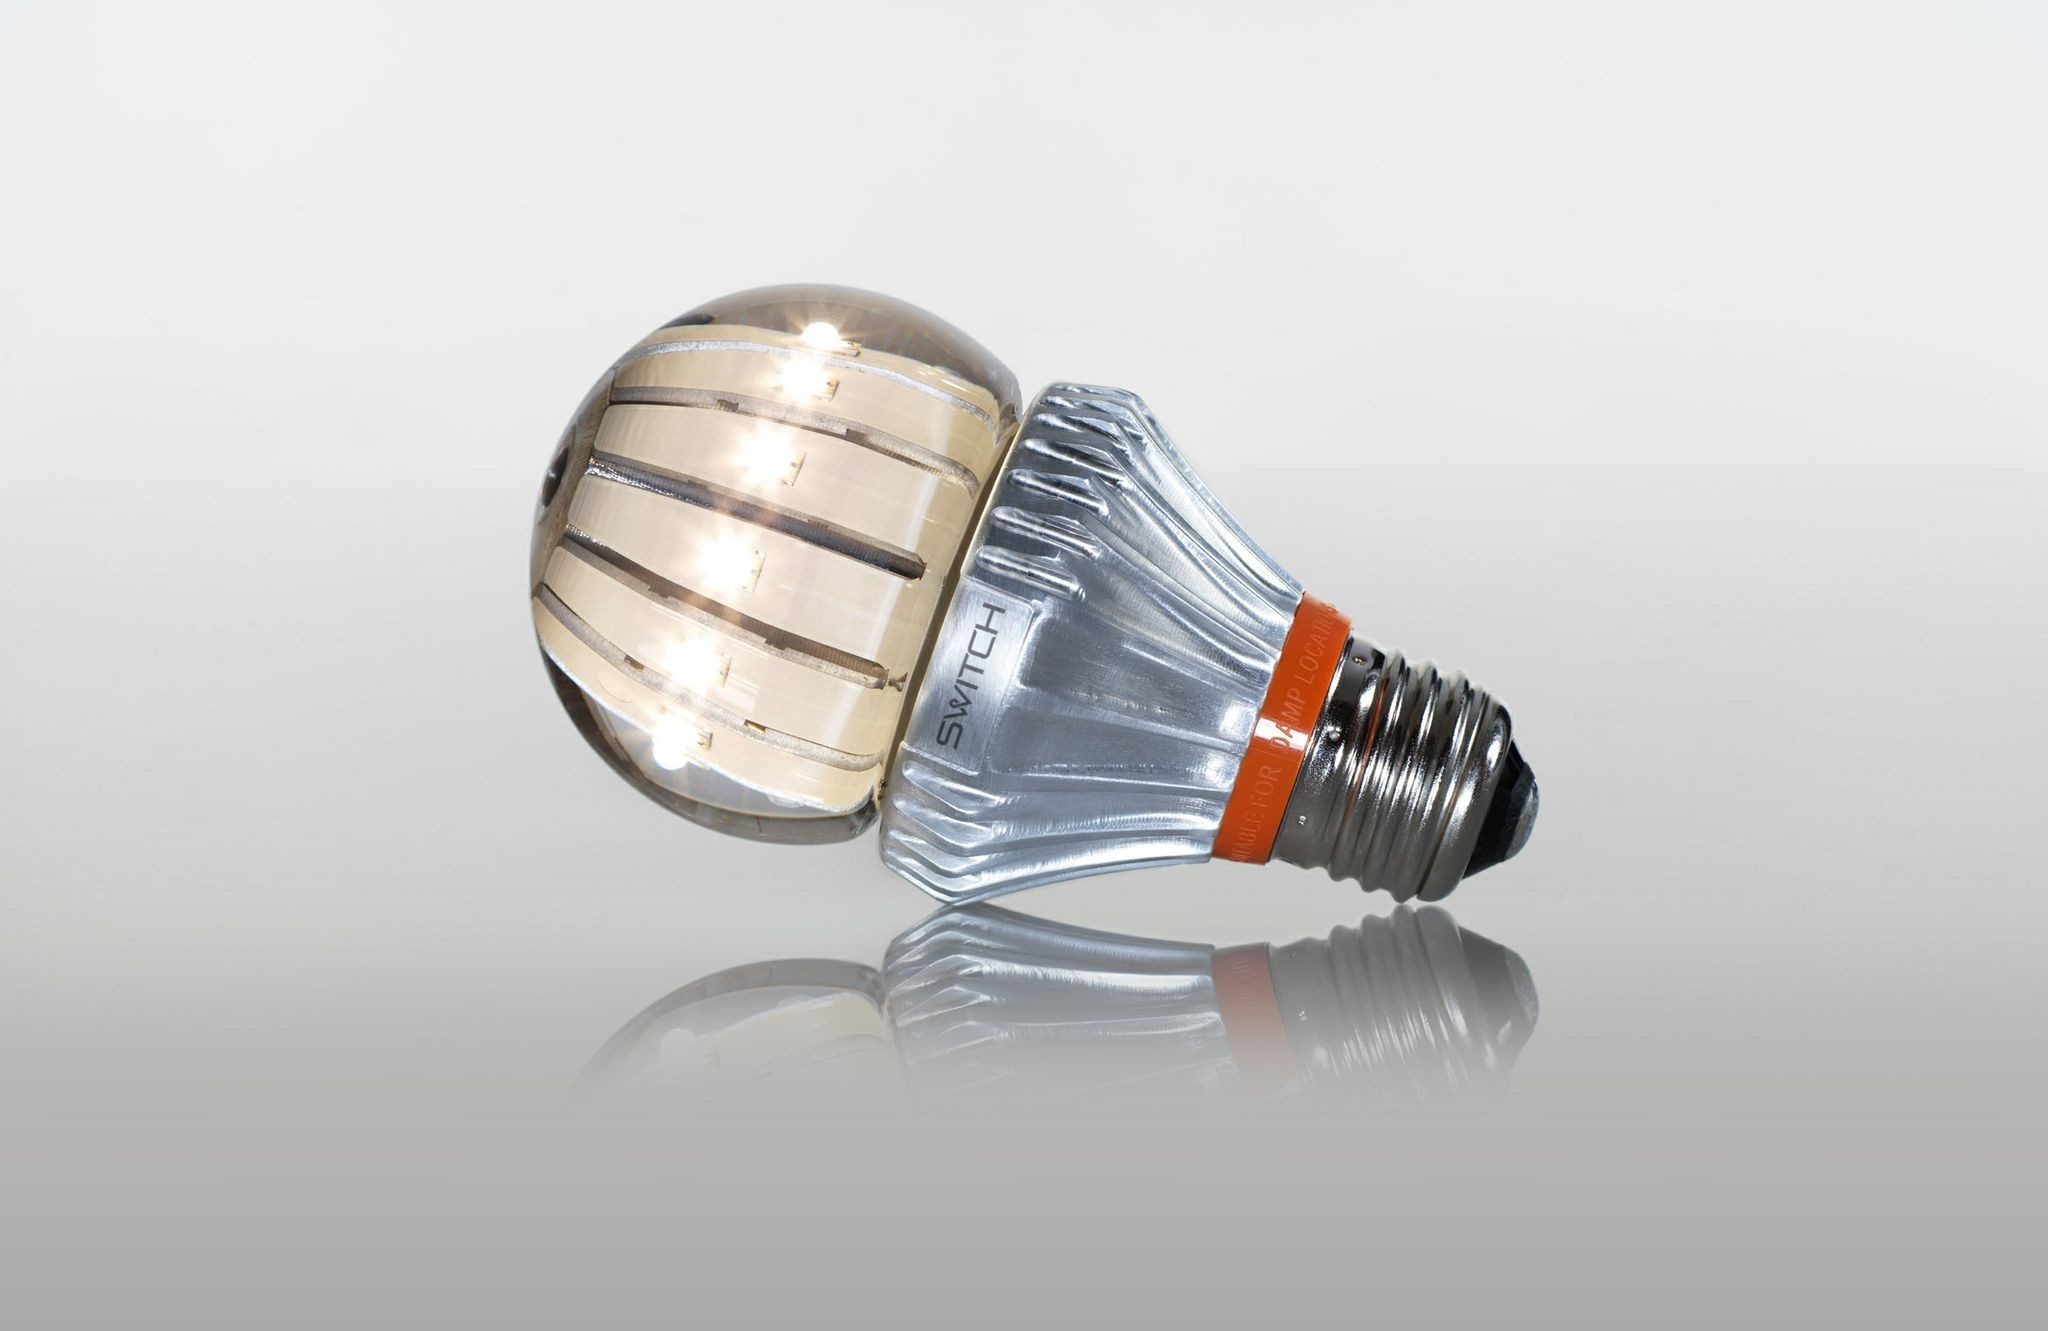 SWITCH60 Review: The First Liquid-Cooled LED Bulb Will Light Up Your House Like Edison